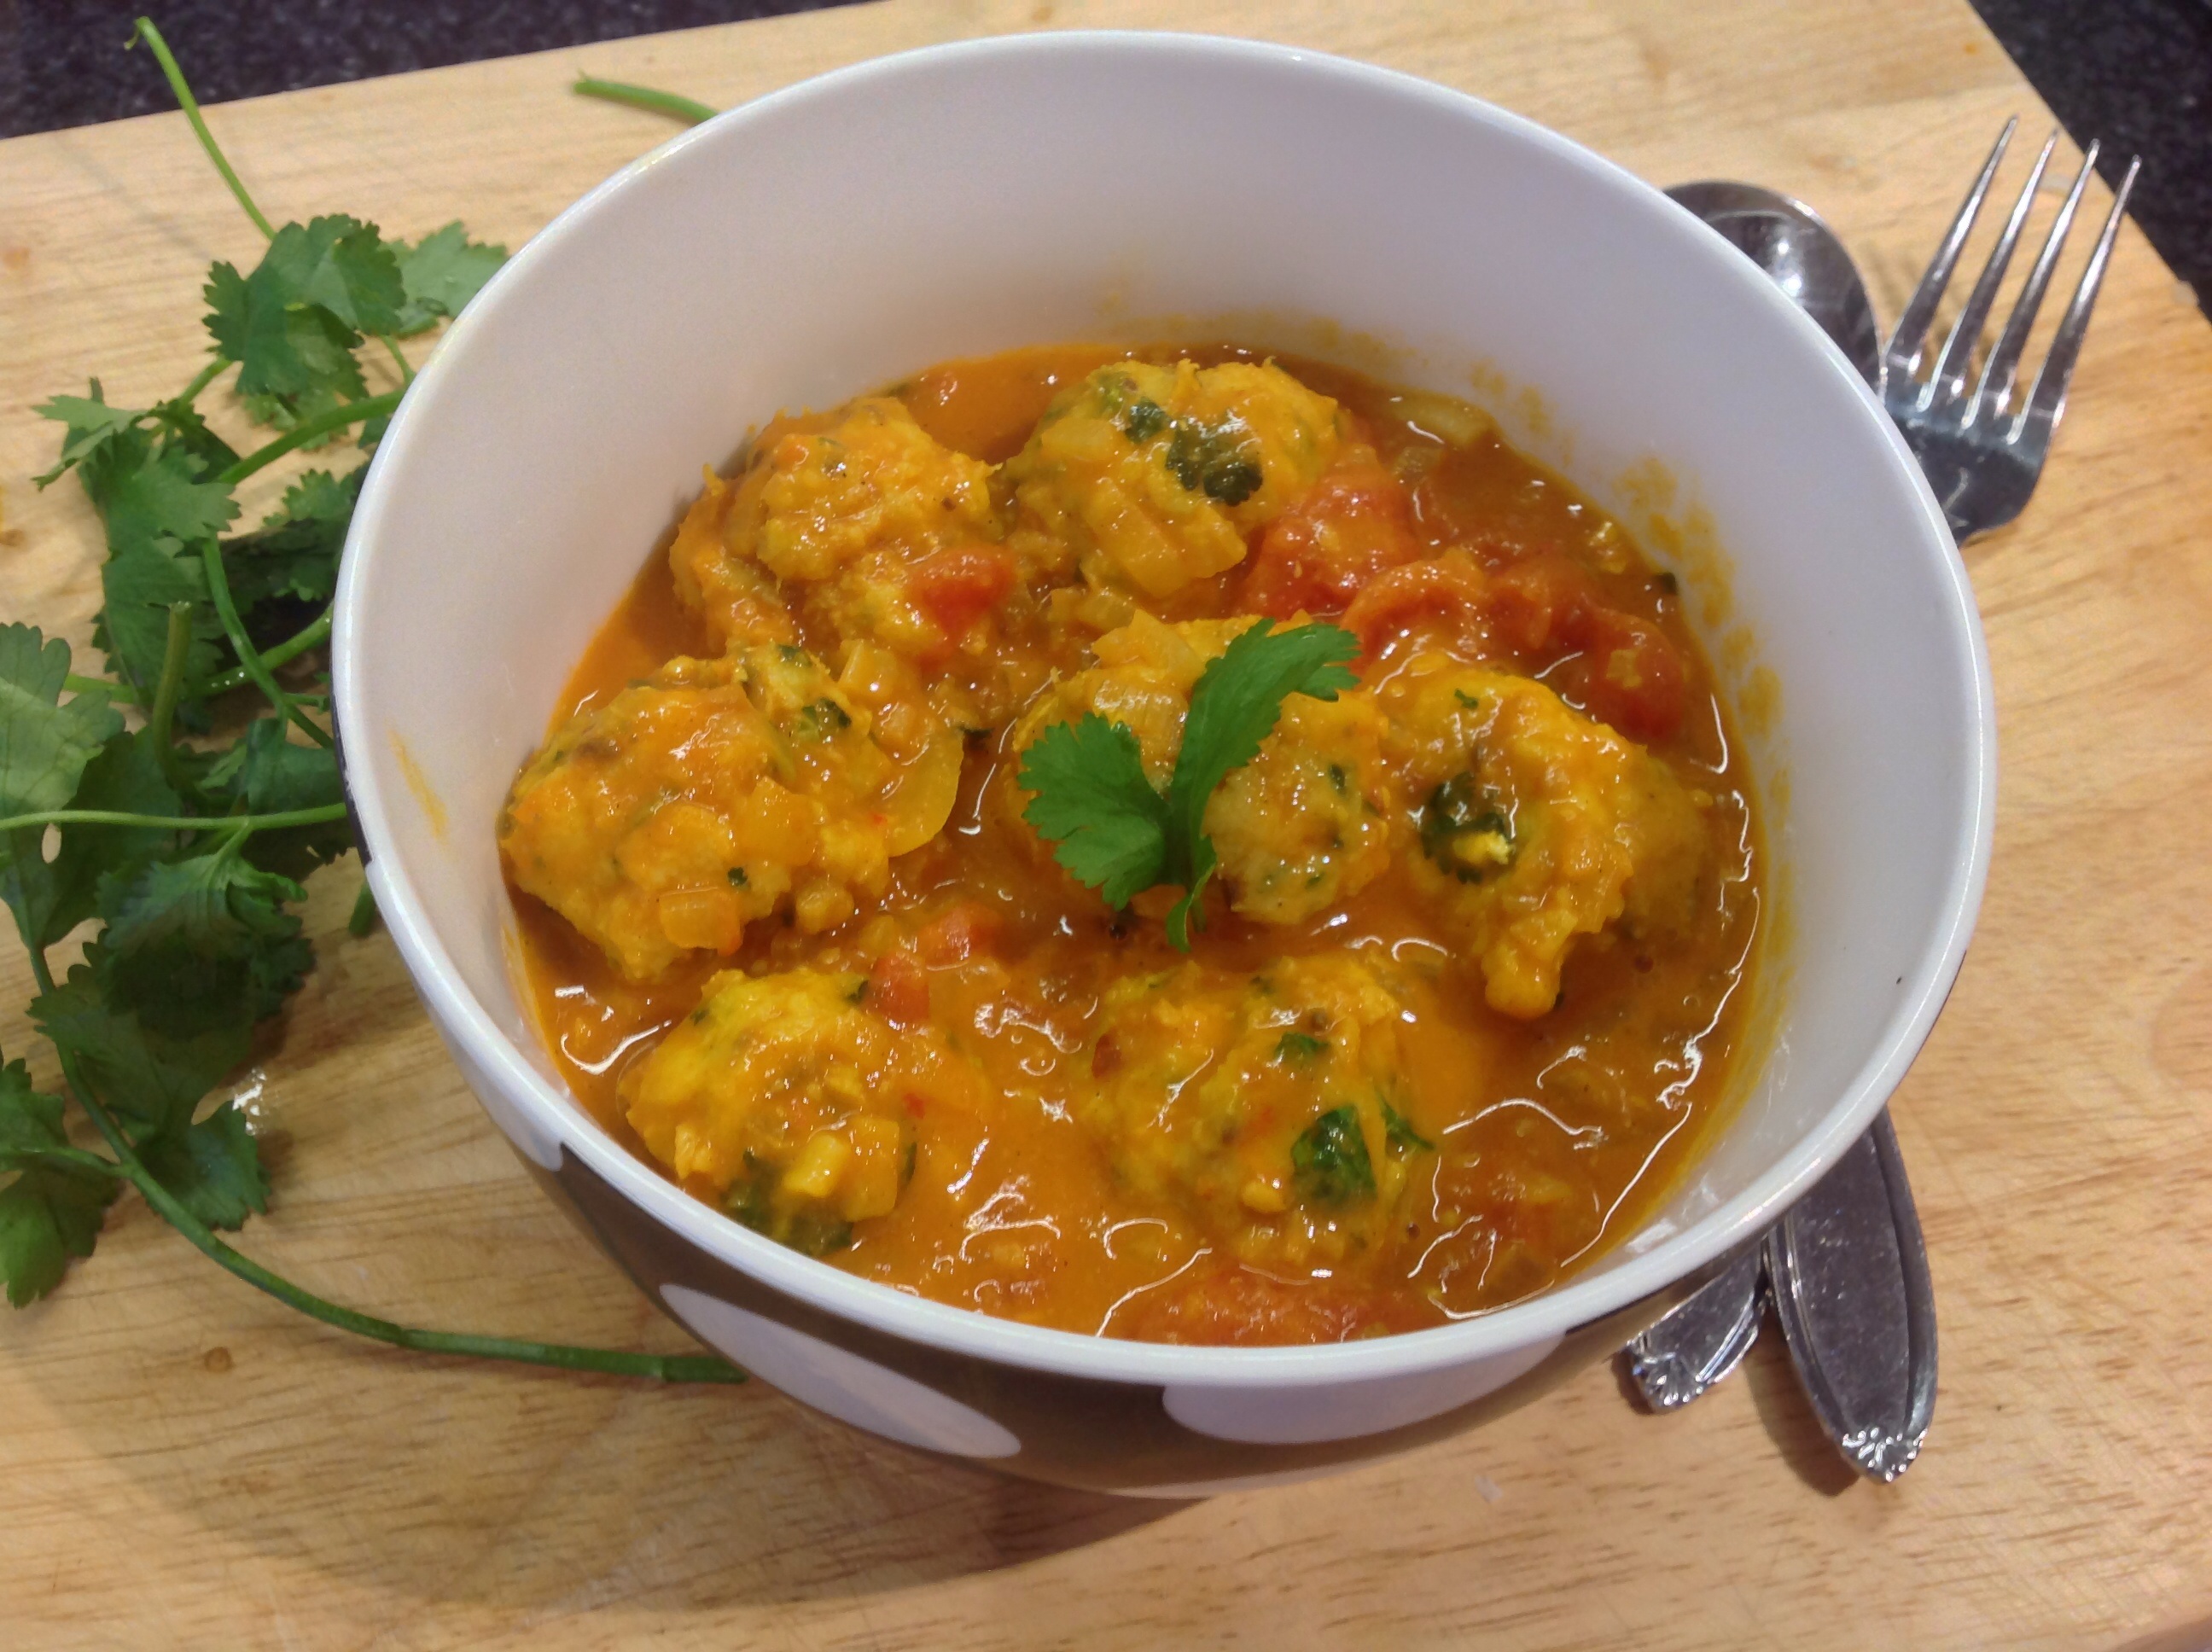 Tomato and Coconut soup with fish dumplings